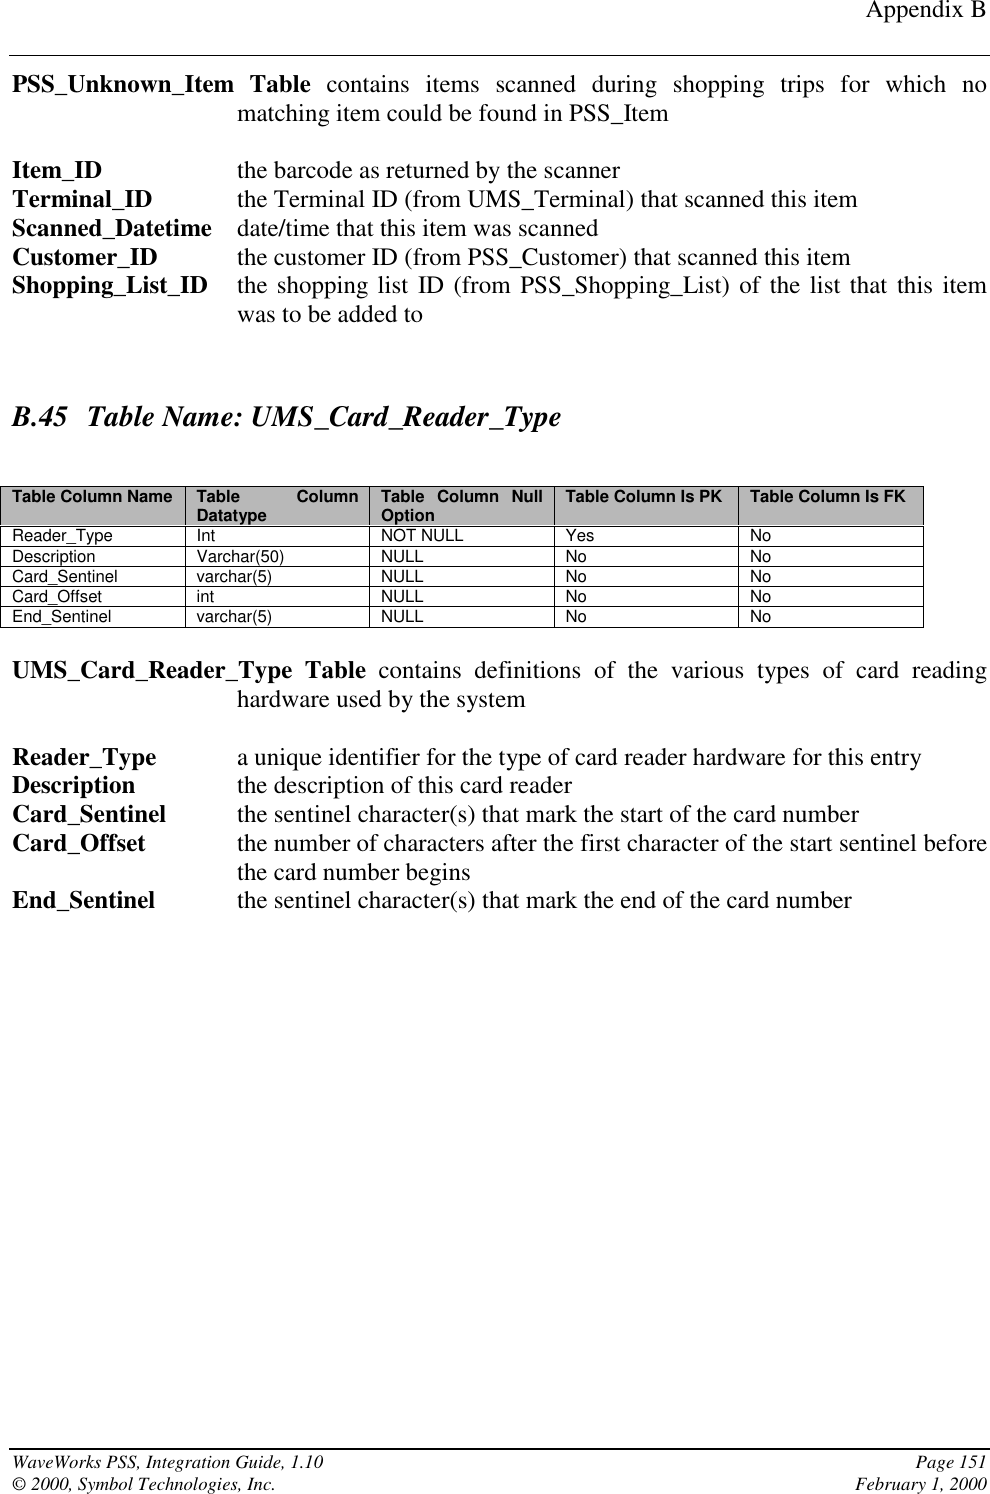 Appendix BWaveWorks PSS, Integration Guide, 1.10 Page 151© 2000, Symbol Technologies, Inc. February 1, 2000PSS_Unknown_Item Table contains items scanned during shopping trips for which nomatching item could be found in PSS_ItemItem_ID the barcode as returned by the scannerTerminal_ID the Terminal ID (from UMS_Terminal) that scanned this itemScanned_Datetime date/time that this item was scannedCustomer_ID the customer ID (from PSS_Customer) that scanned this itemShopping_List_ID the shopping list ID (from PSS_Shopping_List) of the list that this itemwas to be added toB.45 Table Name: UMS_Card_Reader_TypeTable Column Name Table ColumnDatatype Table Column NullOption Table Column Is PK Table Column Is FKReader_Type Int NOT NULL Yes NoDescription Varchar(50) NULL No NoCard_Sentinel varchar(5) NULL No NoCard_Offset int NULL No NoEnd_Sentinel varchar(5) NULL No NoUMS_Card_Reader_Type Table contains definitions of the various types of card readinghardware used by the systemReader_Type a unique identifier for the type of card reader hardware for this entryDescription the description of this card readerCard_Sentinel the sentinel character(s) that mark the start of the card numberCard_Offset the number of characters after the first character of the start sentinel beforethe card number beginsEnd_Sentinel the sentinel character(s) that mark the end of the card number